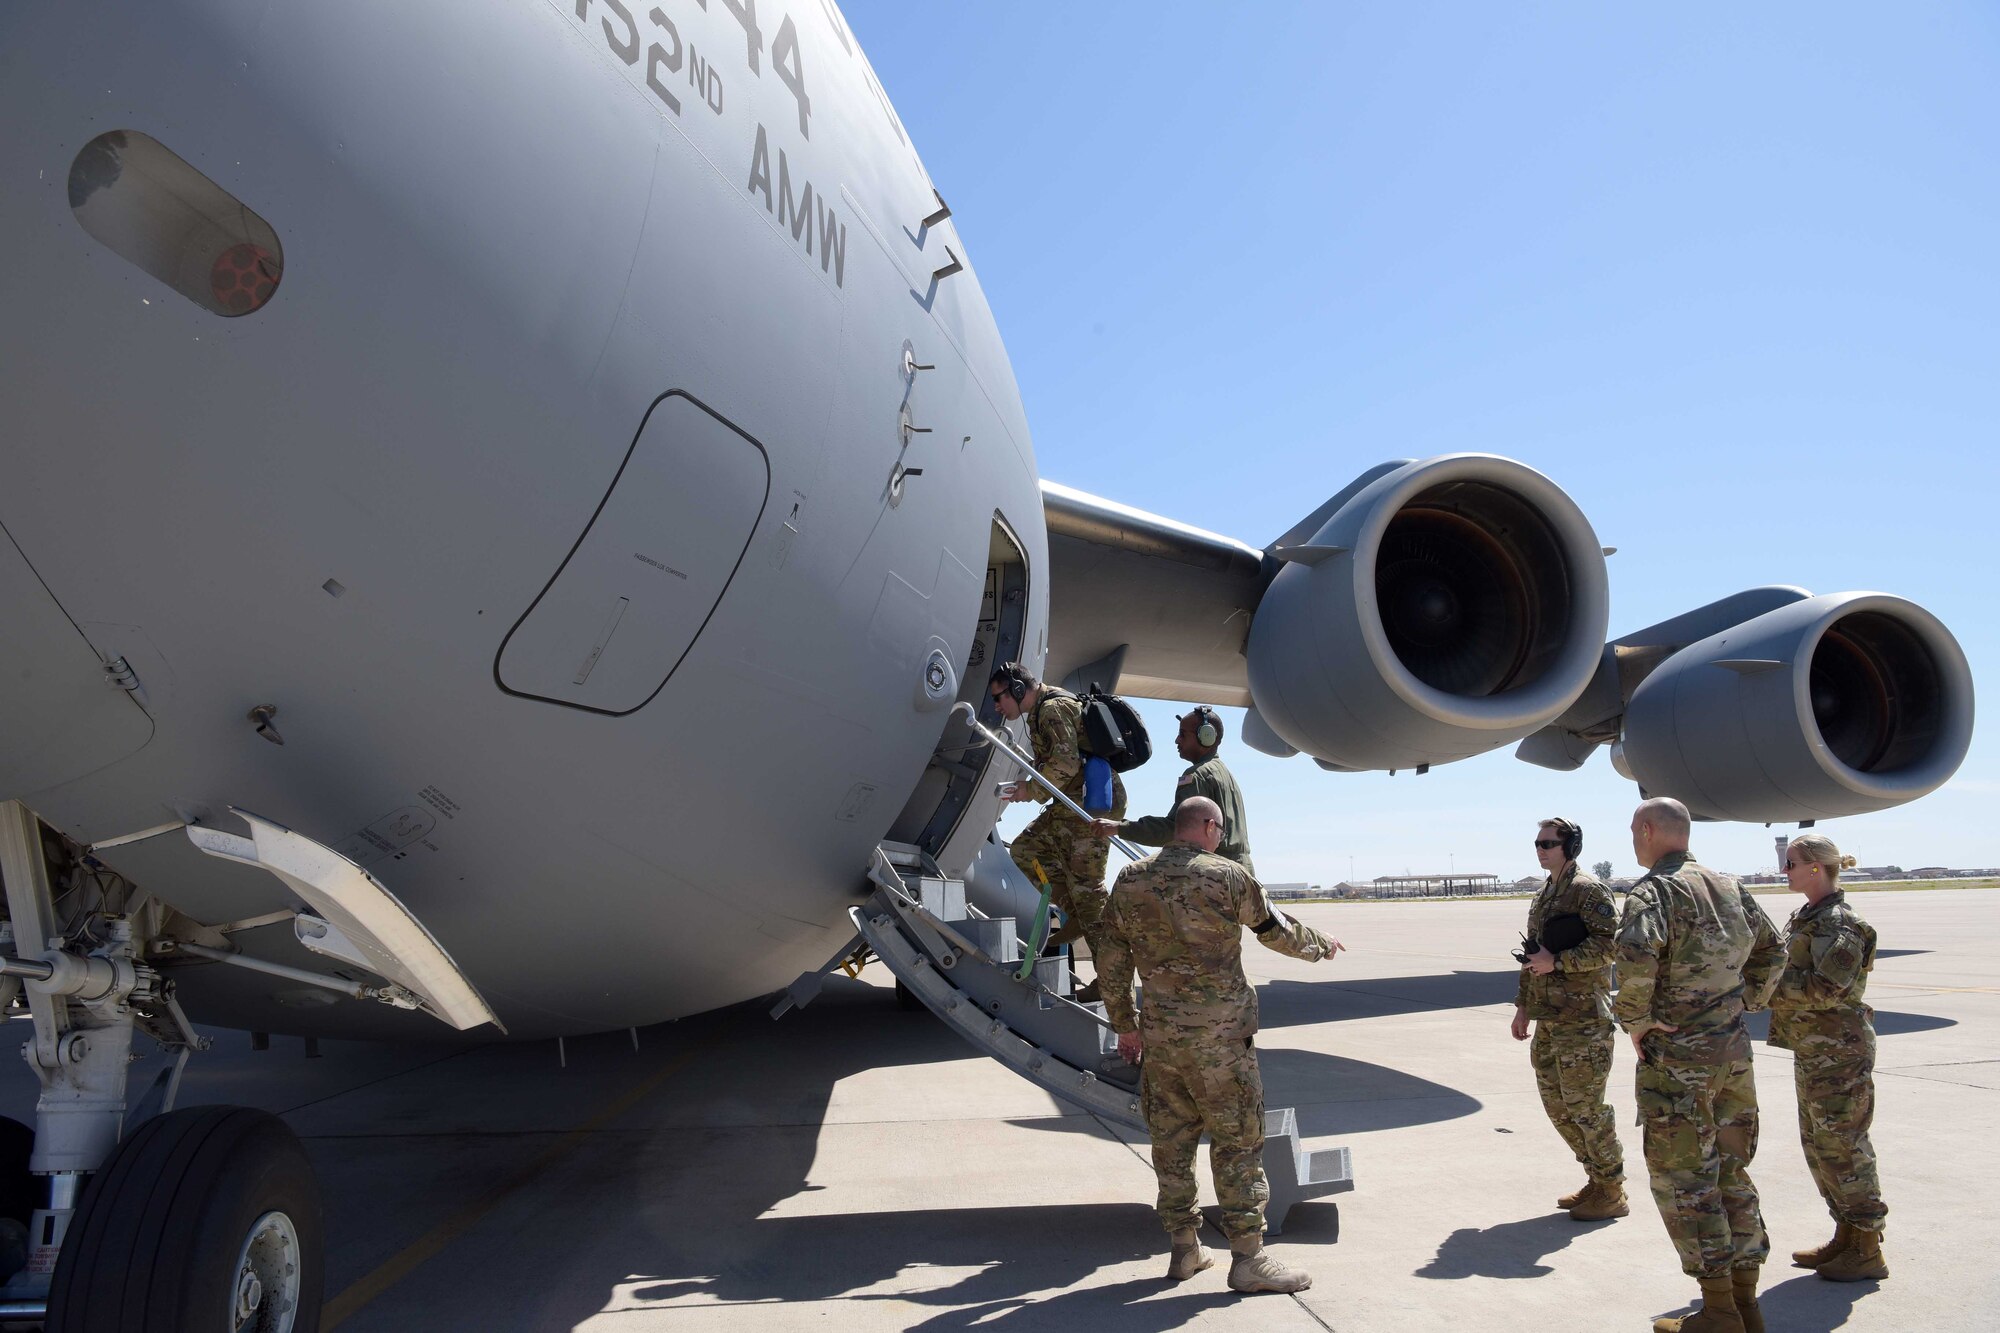 Mobilized Air Force Reserve medics board a C-17 in route to “hot zones” in support of the COVID-19 pandemic from Luke Air Force Base, Ariz., April 5, 2020. This deployment is part of a larger mobilization package of more than 120 doctors, nurses and respiratory technicians Air Force Reserve units across the nation provided over the past 48 hours in support of the COVID-19 response to take care of Americans. The C-17 is deployed from March Air Force Base, Calif.